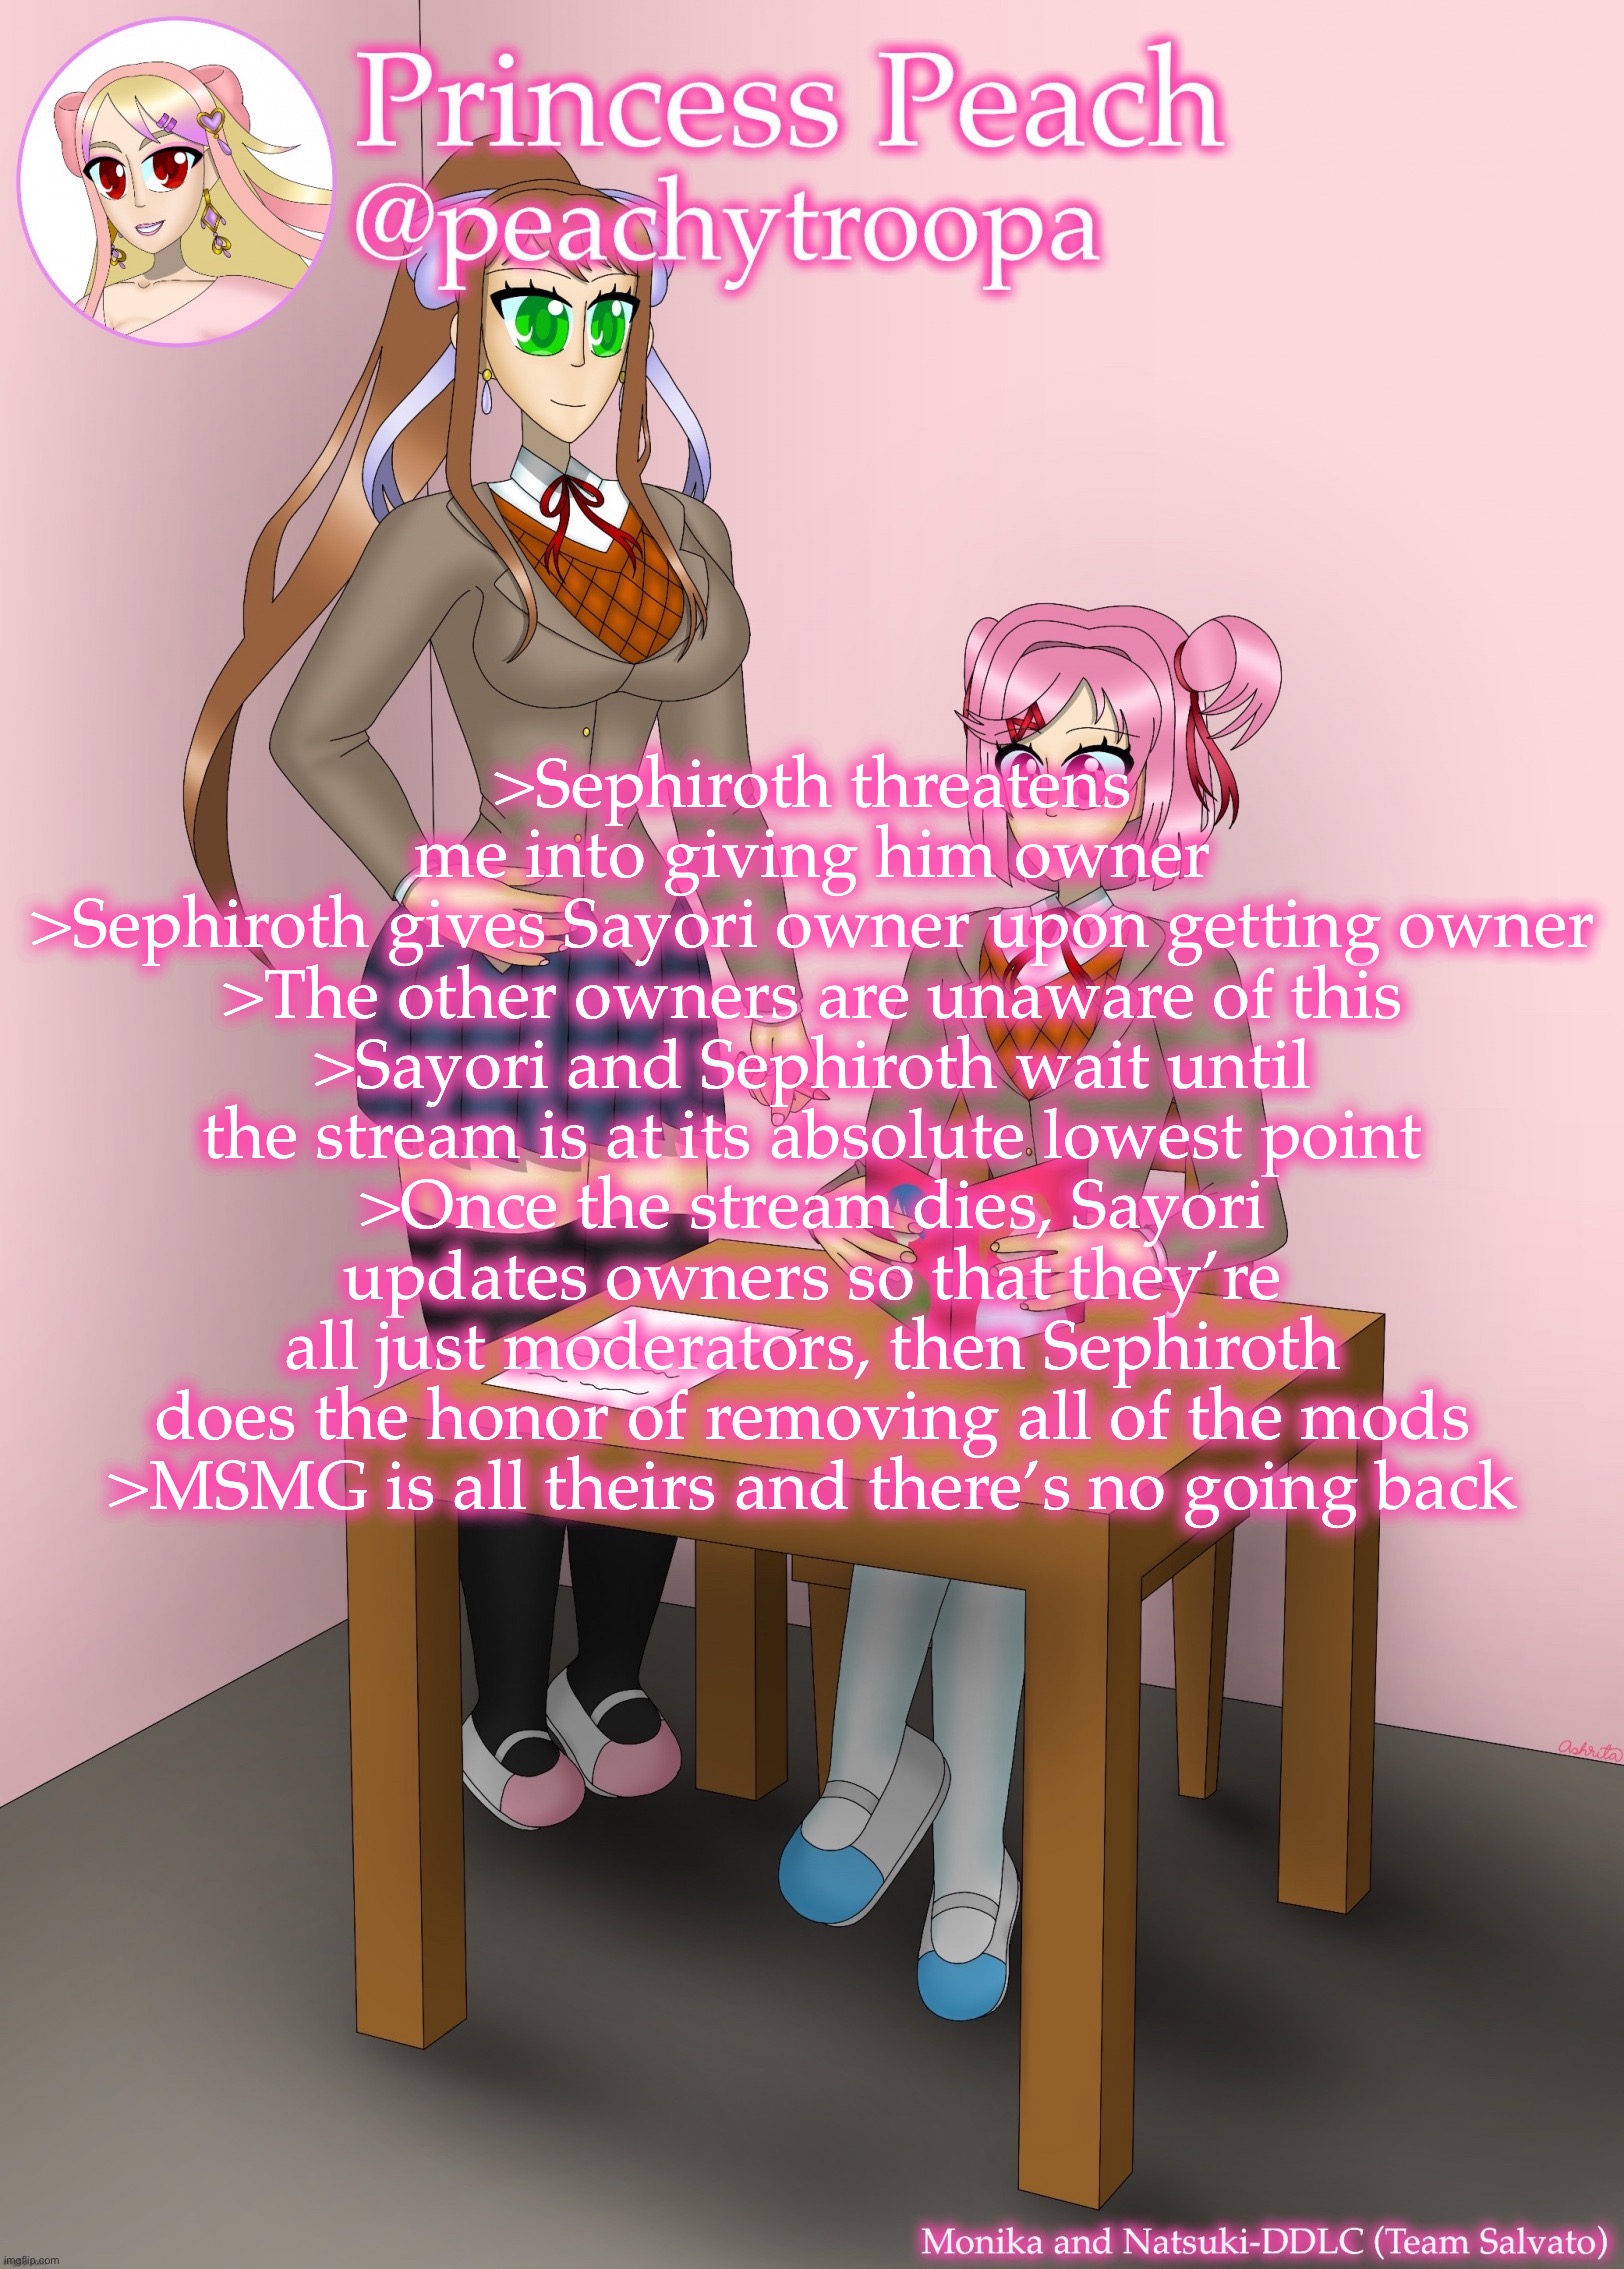 Monika and Natsuki | >Sephiroth threatens me into giving him owner
>Sephiroth gives Sayori owner upon getting owner
>The other owners are unaware of this
>Sayori and Sephiroth wait until the stream is at its absolute lowest point
>Once the stream dies, Sayori updates owners so that they’re all just moderators, then Sephiroth does the honor of removing all of the mods
>MSMG is all theirs and there’s no going back | image tagged in monika and natsuki | made w/ Imgflip meme maker